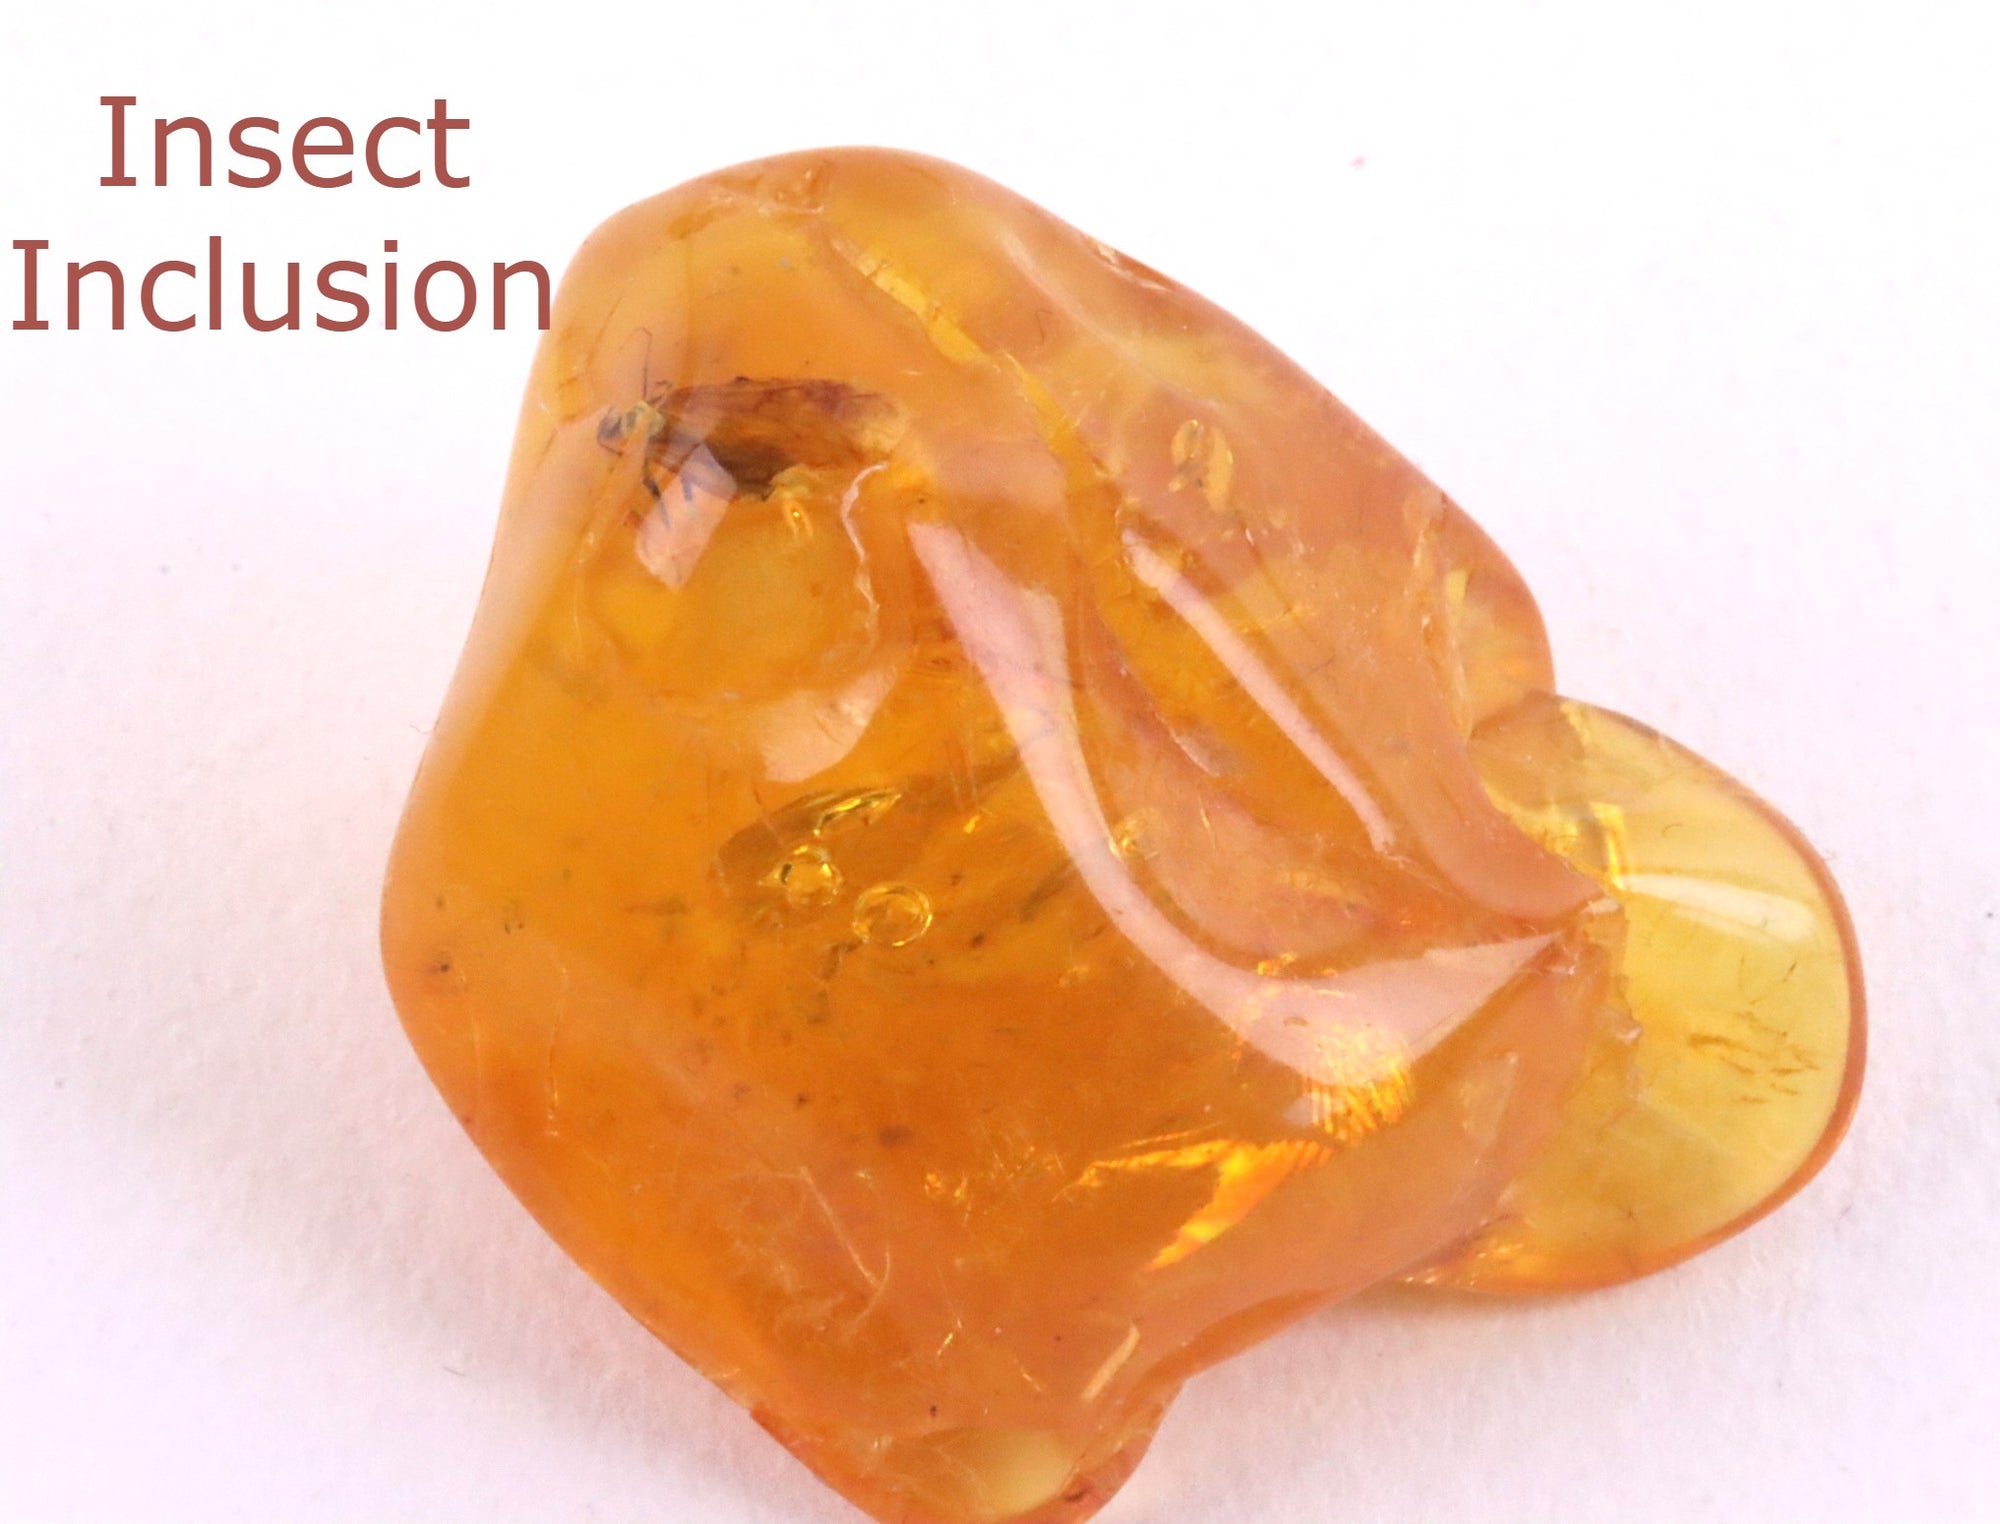 40 million year old Amber With Insect Inclusion